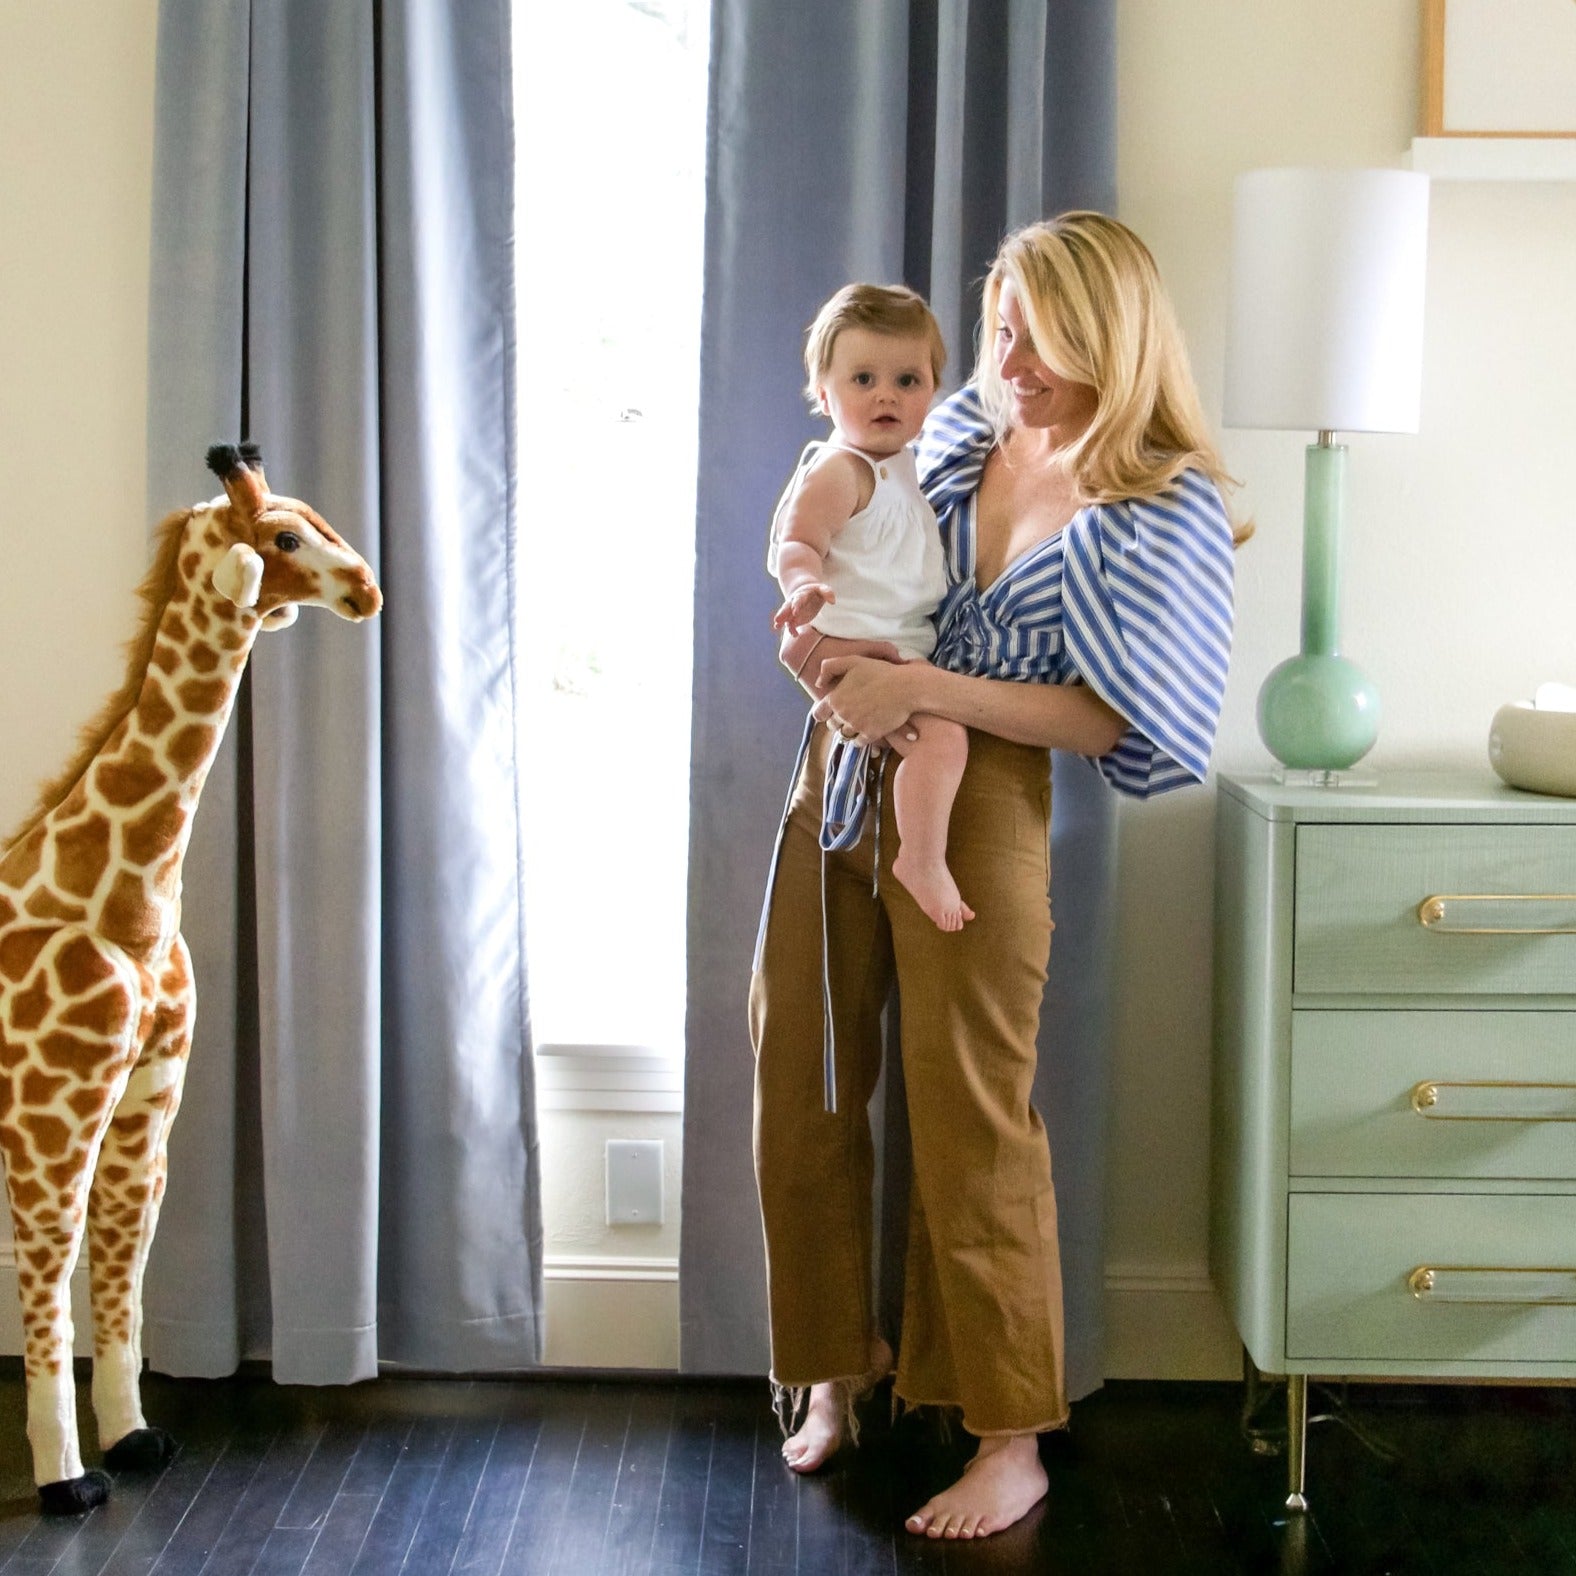 Nursery room window styled with sky velvet curtains and blue green dresser next to blonde joyful mother carrying blonde baby